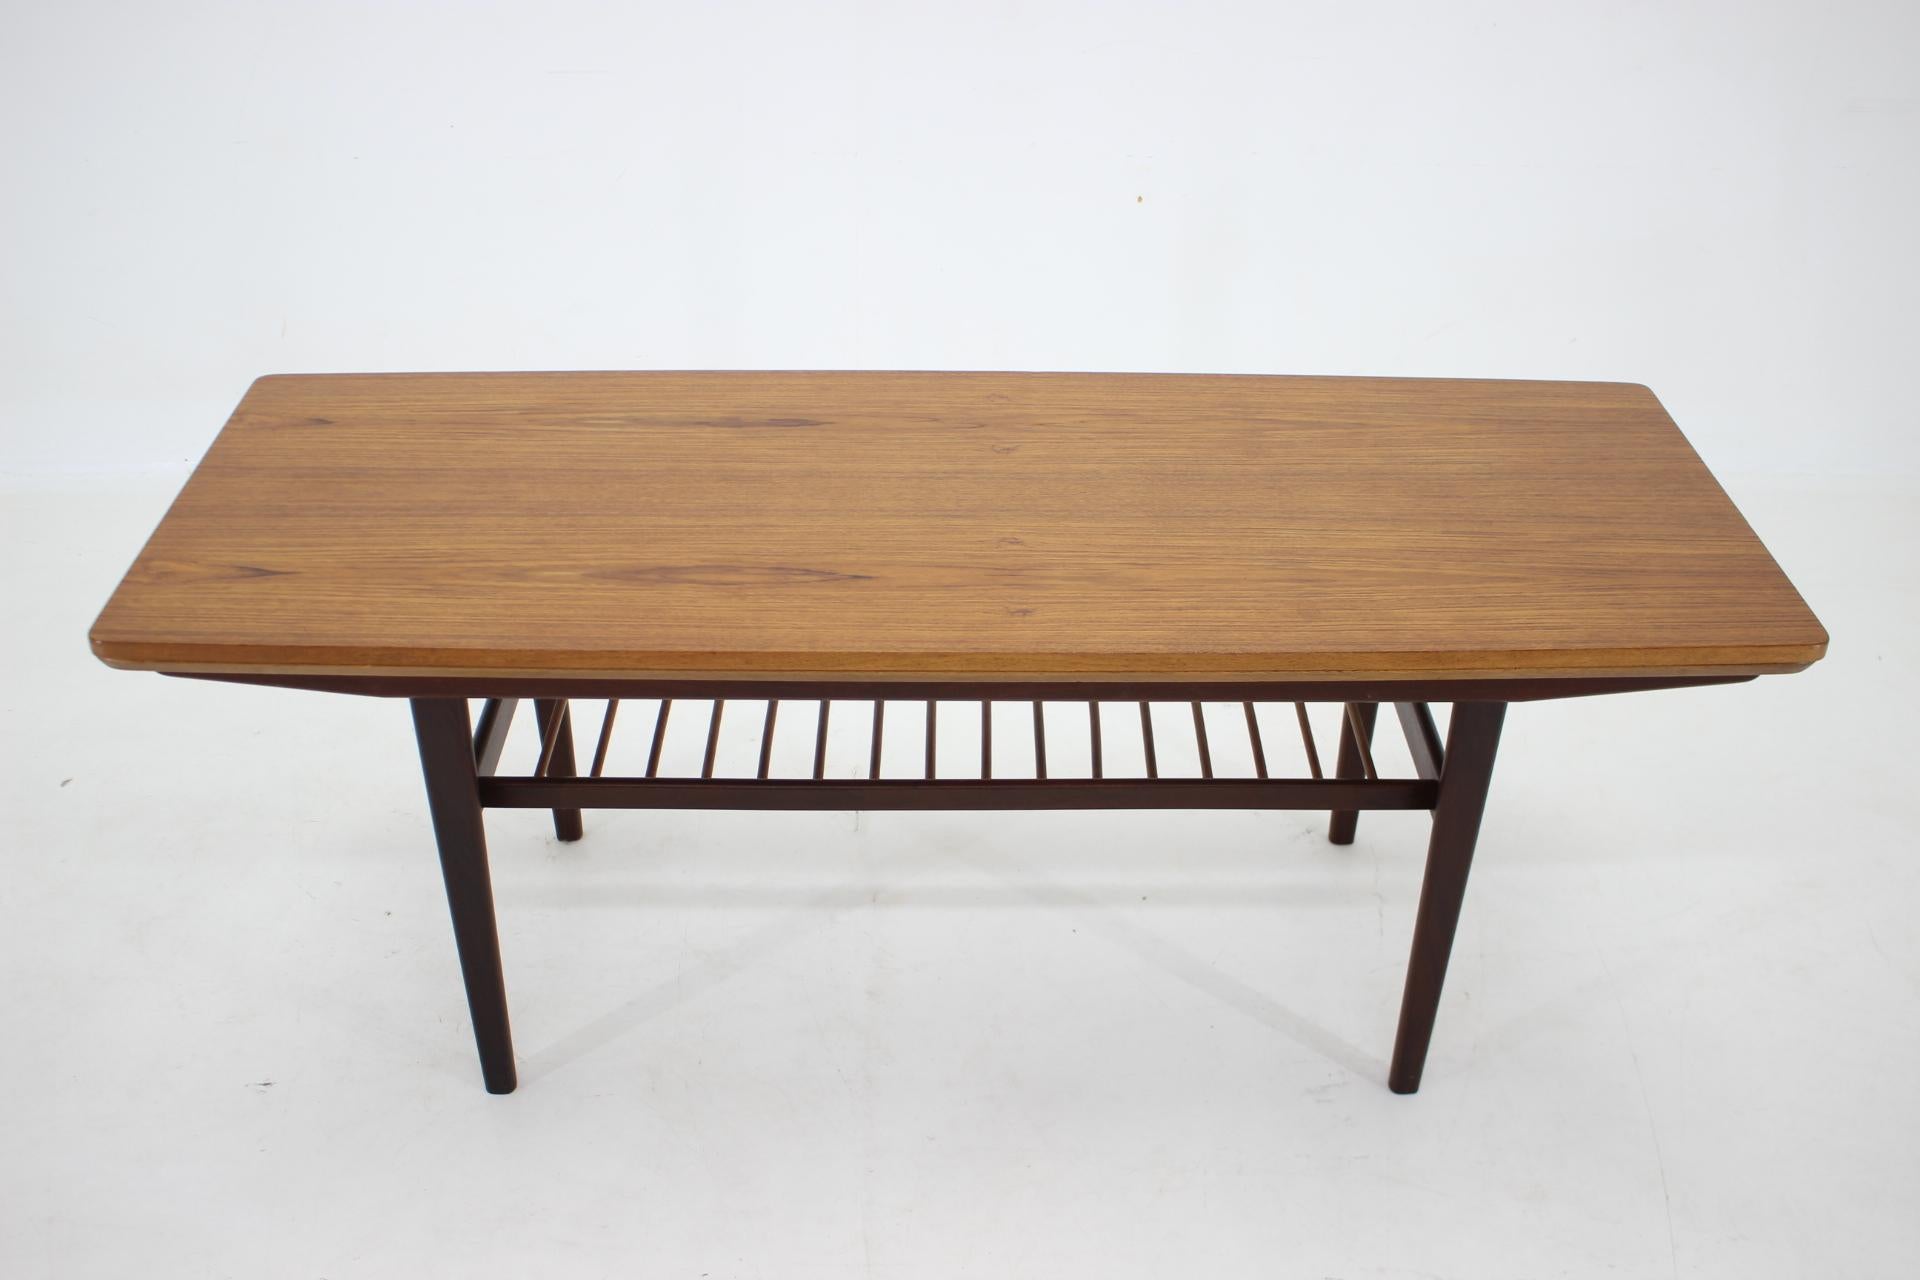 1960s Danish Teak Adjustable and Extendable Coffee Table, Denmark  For Sale 4